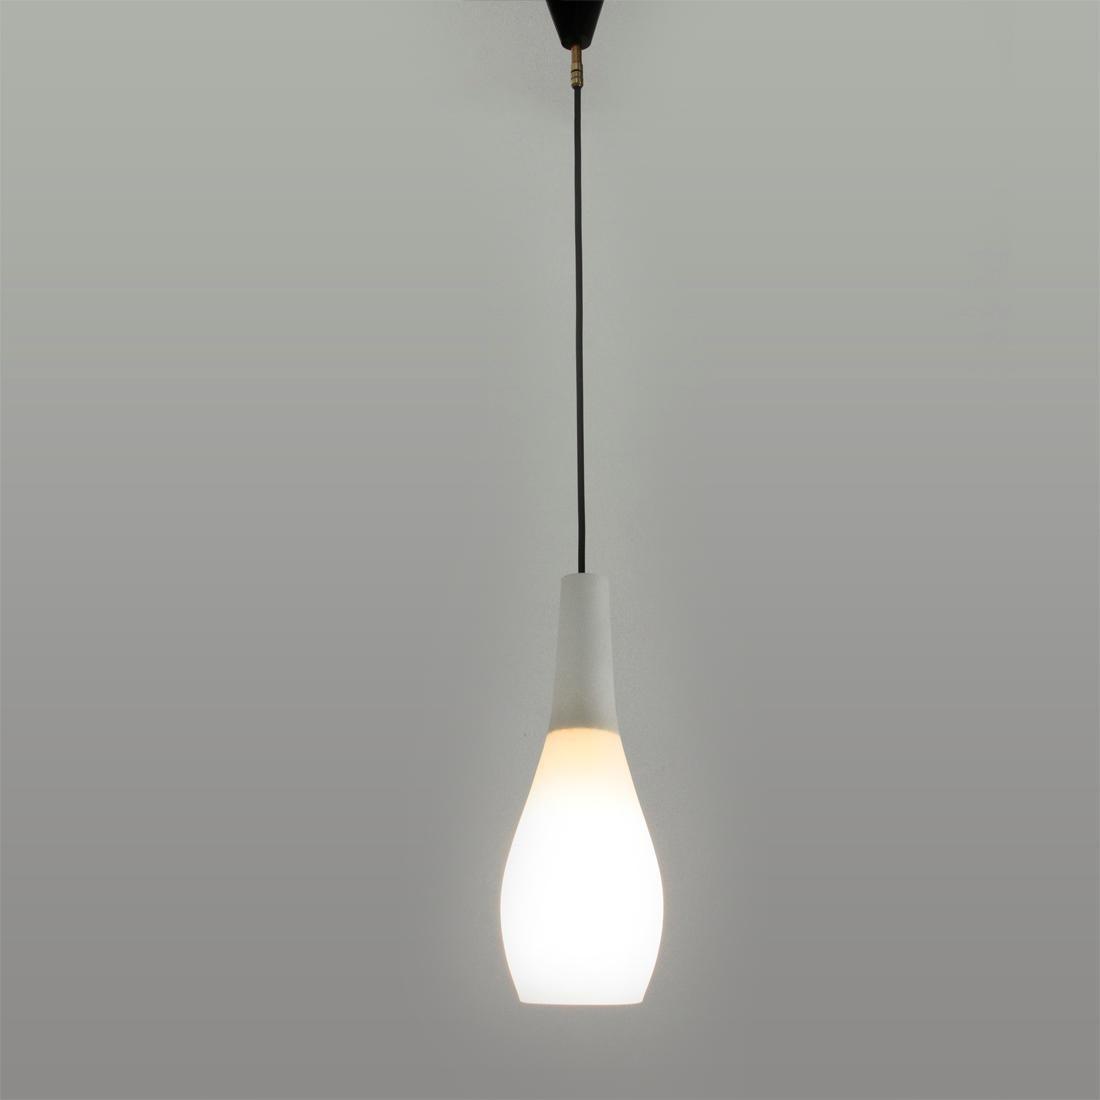 Midcentury White Glass Italian Pendant Lamp, 1950s In Good Condition For Sale In Savona, IT